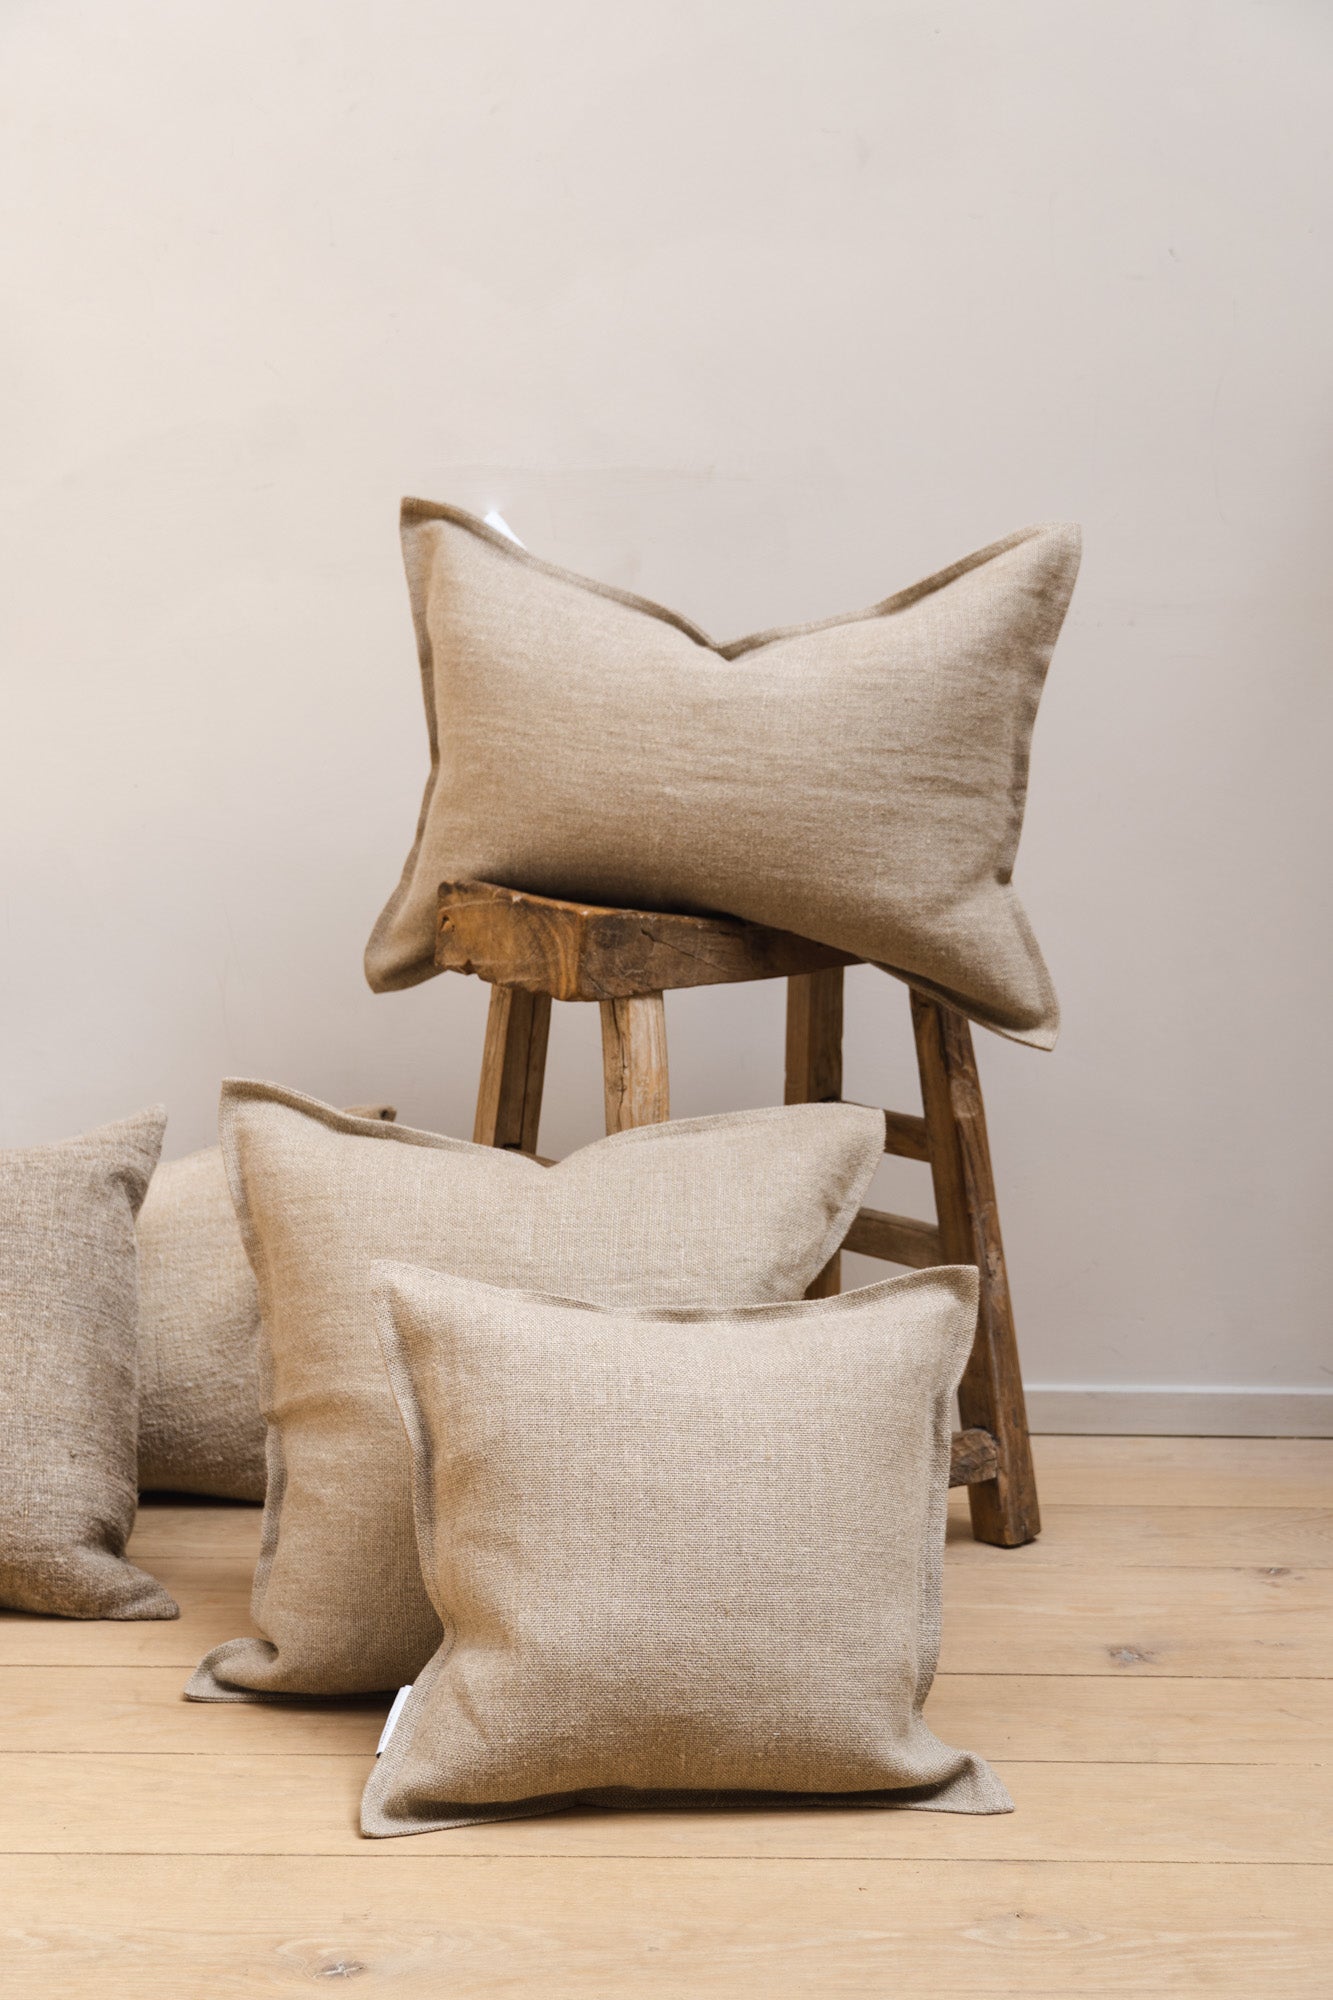 Beige-coloured natural linen cushions set on floor and wooden stool.